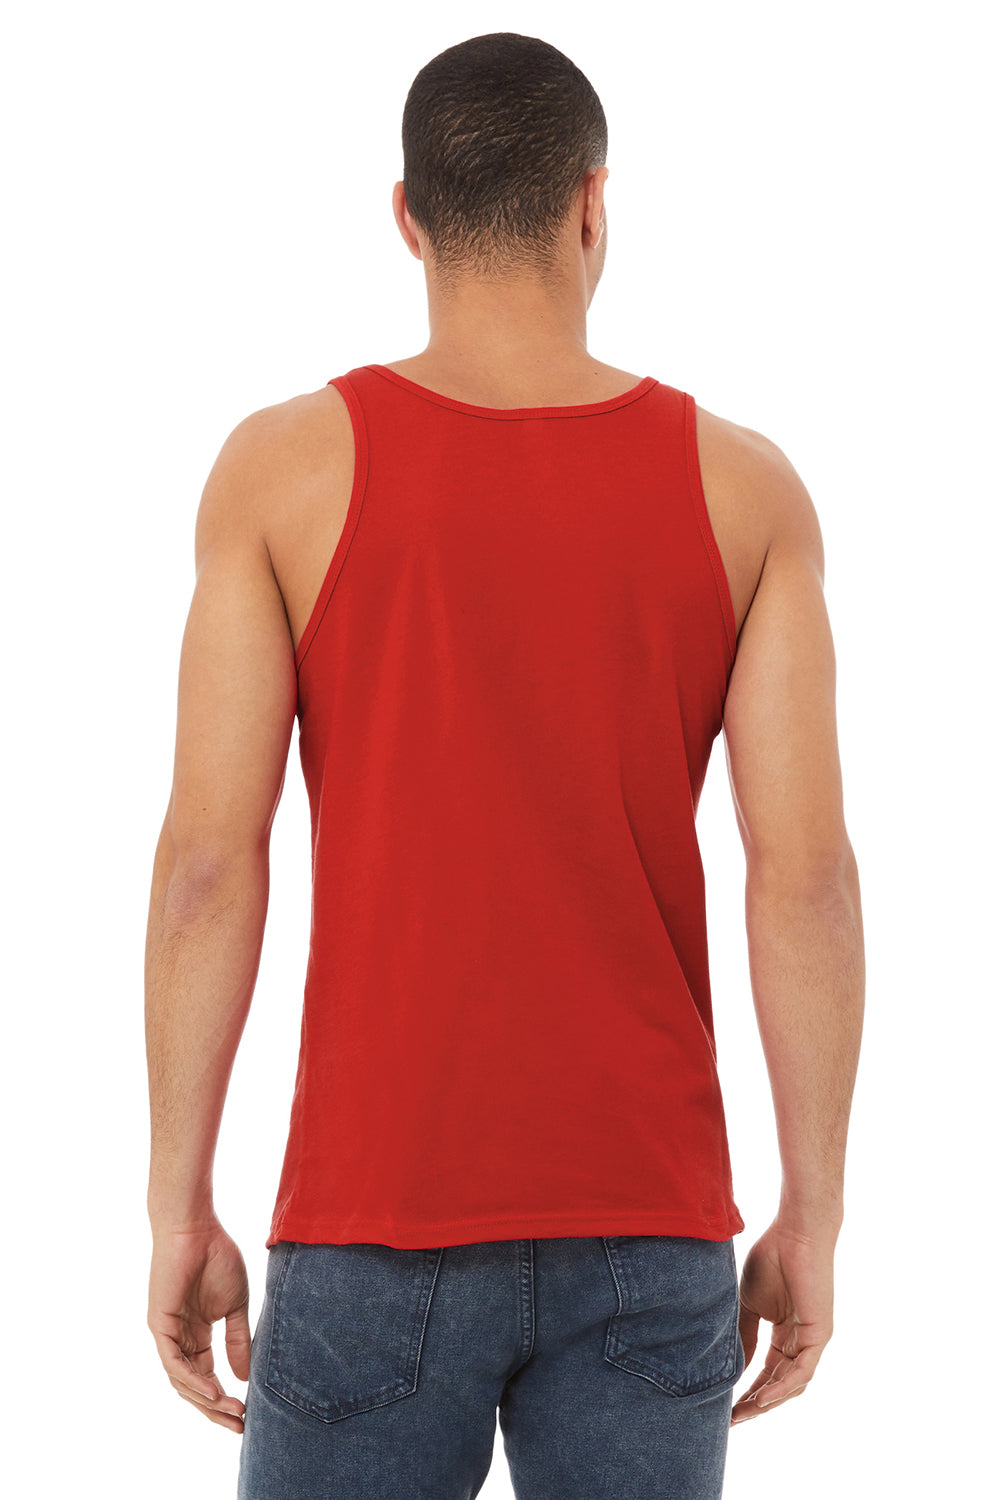 Bella + Canvas BC3480/3480 Mens Jersey Tank Top Red Model Back